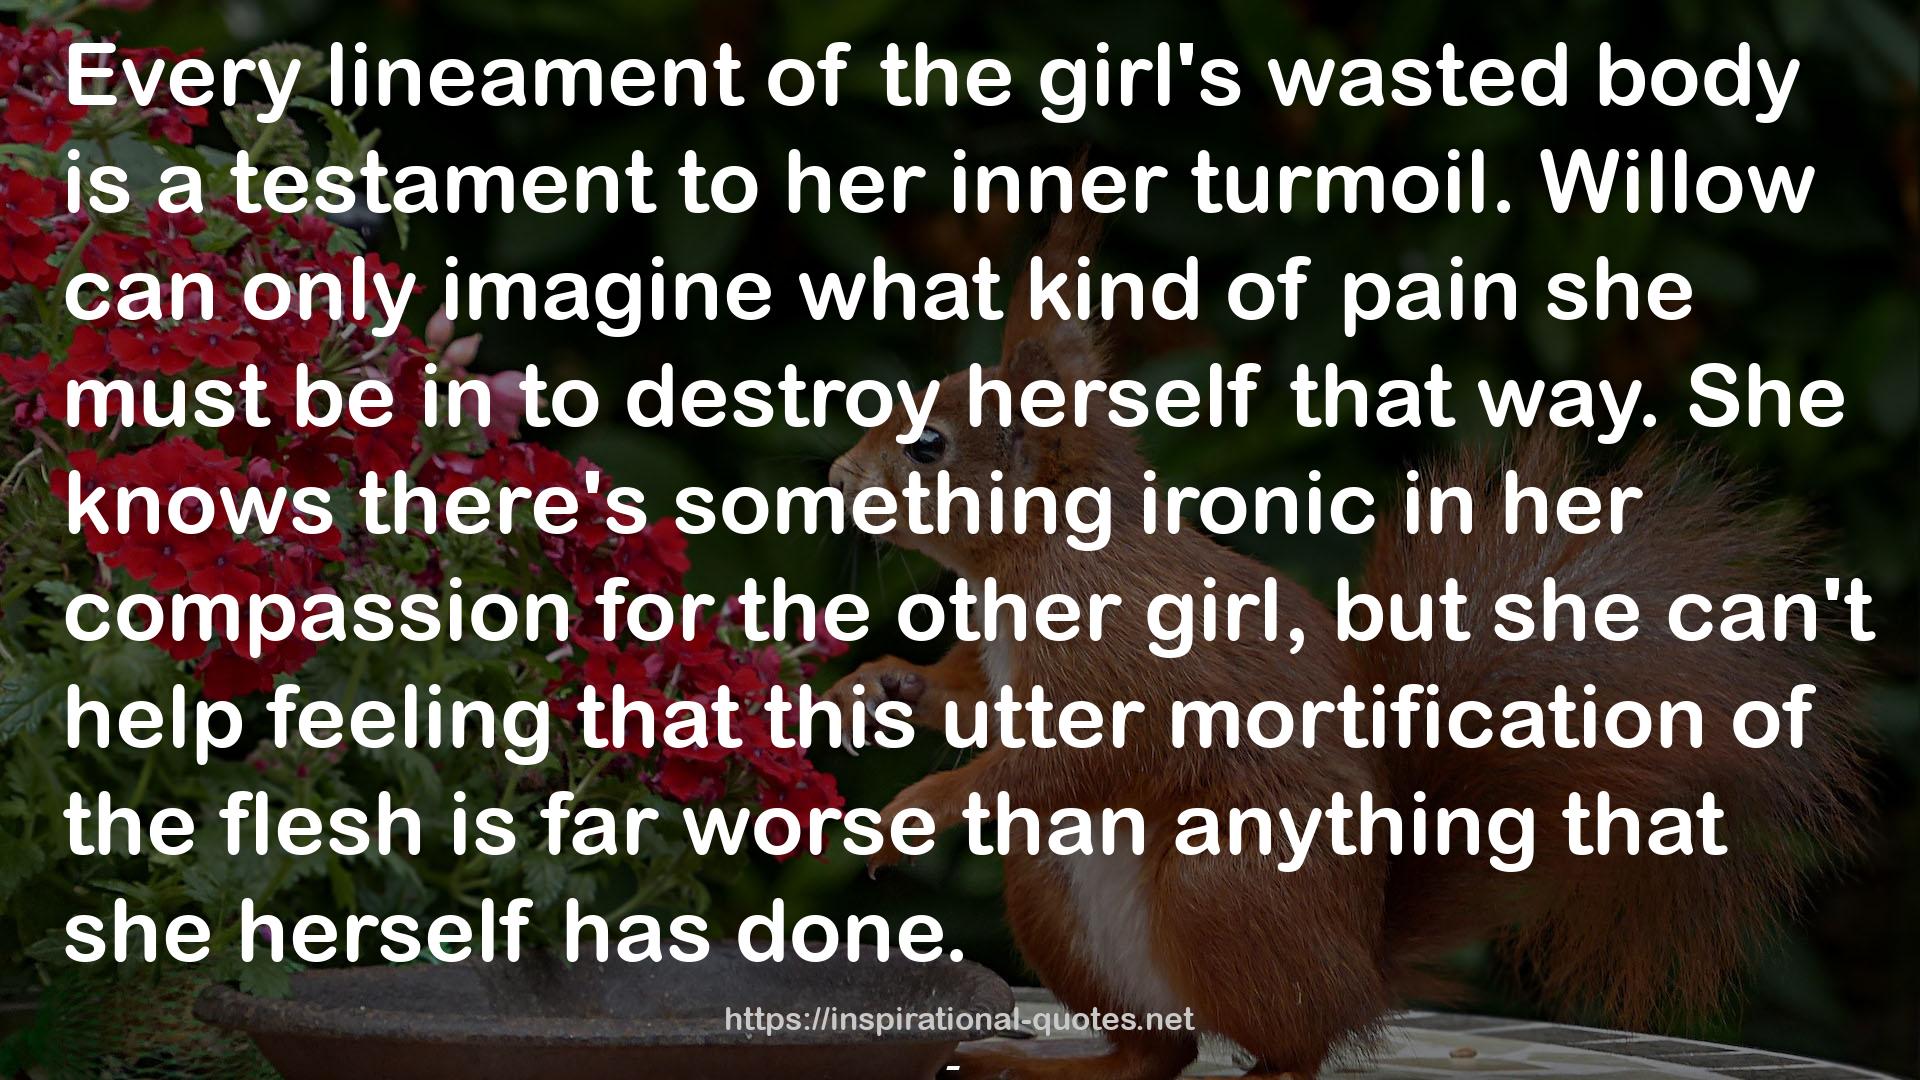 the girl's wasted body  QUOTES